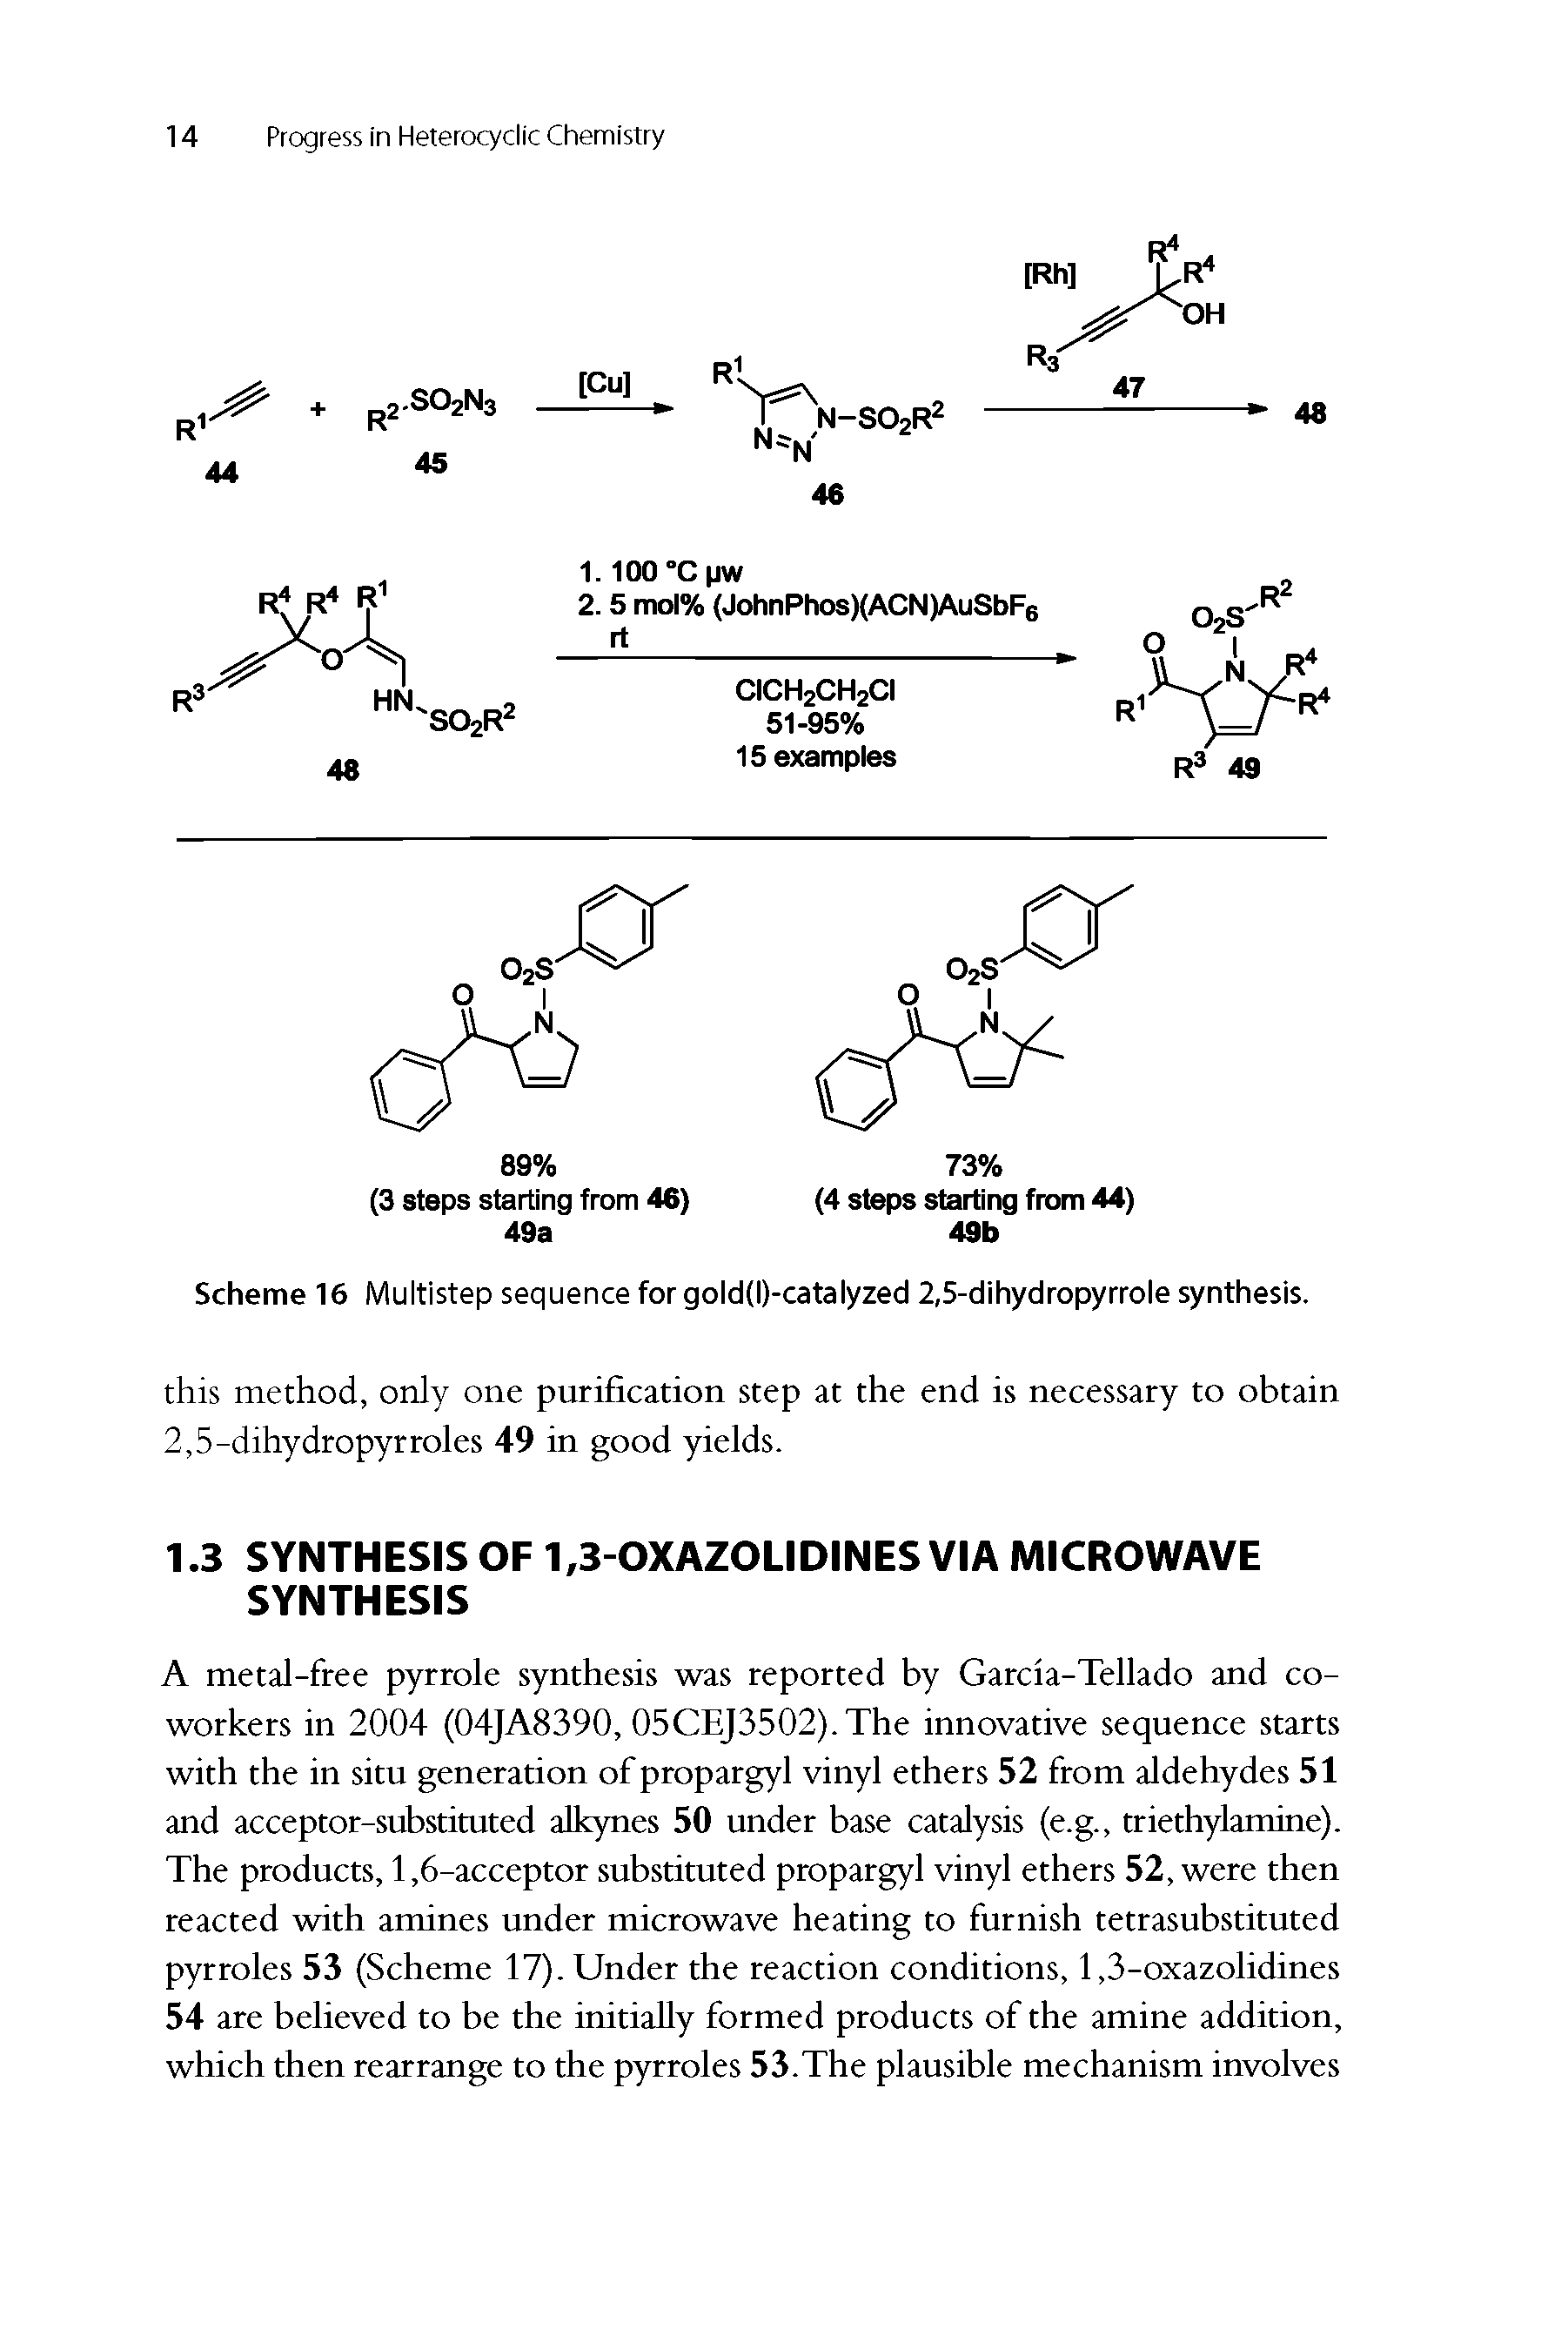 Scheme 16 Multistep sequence forgold(l)-catalyzed 2,5-dihydropyrrole synthesis.